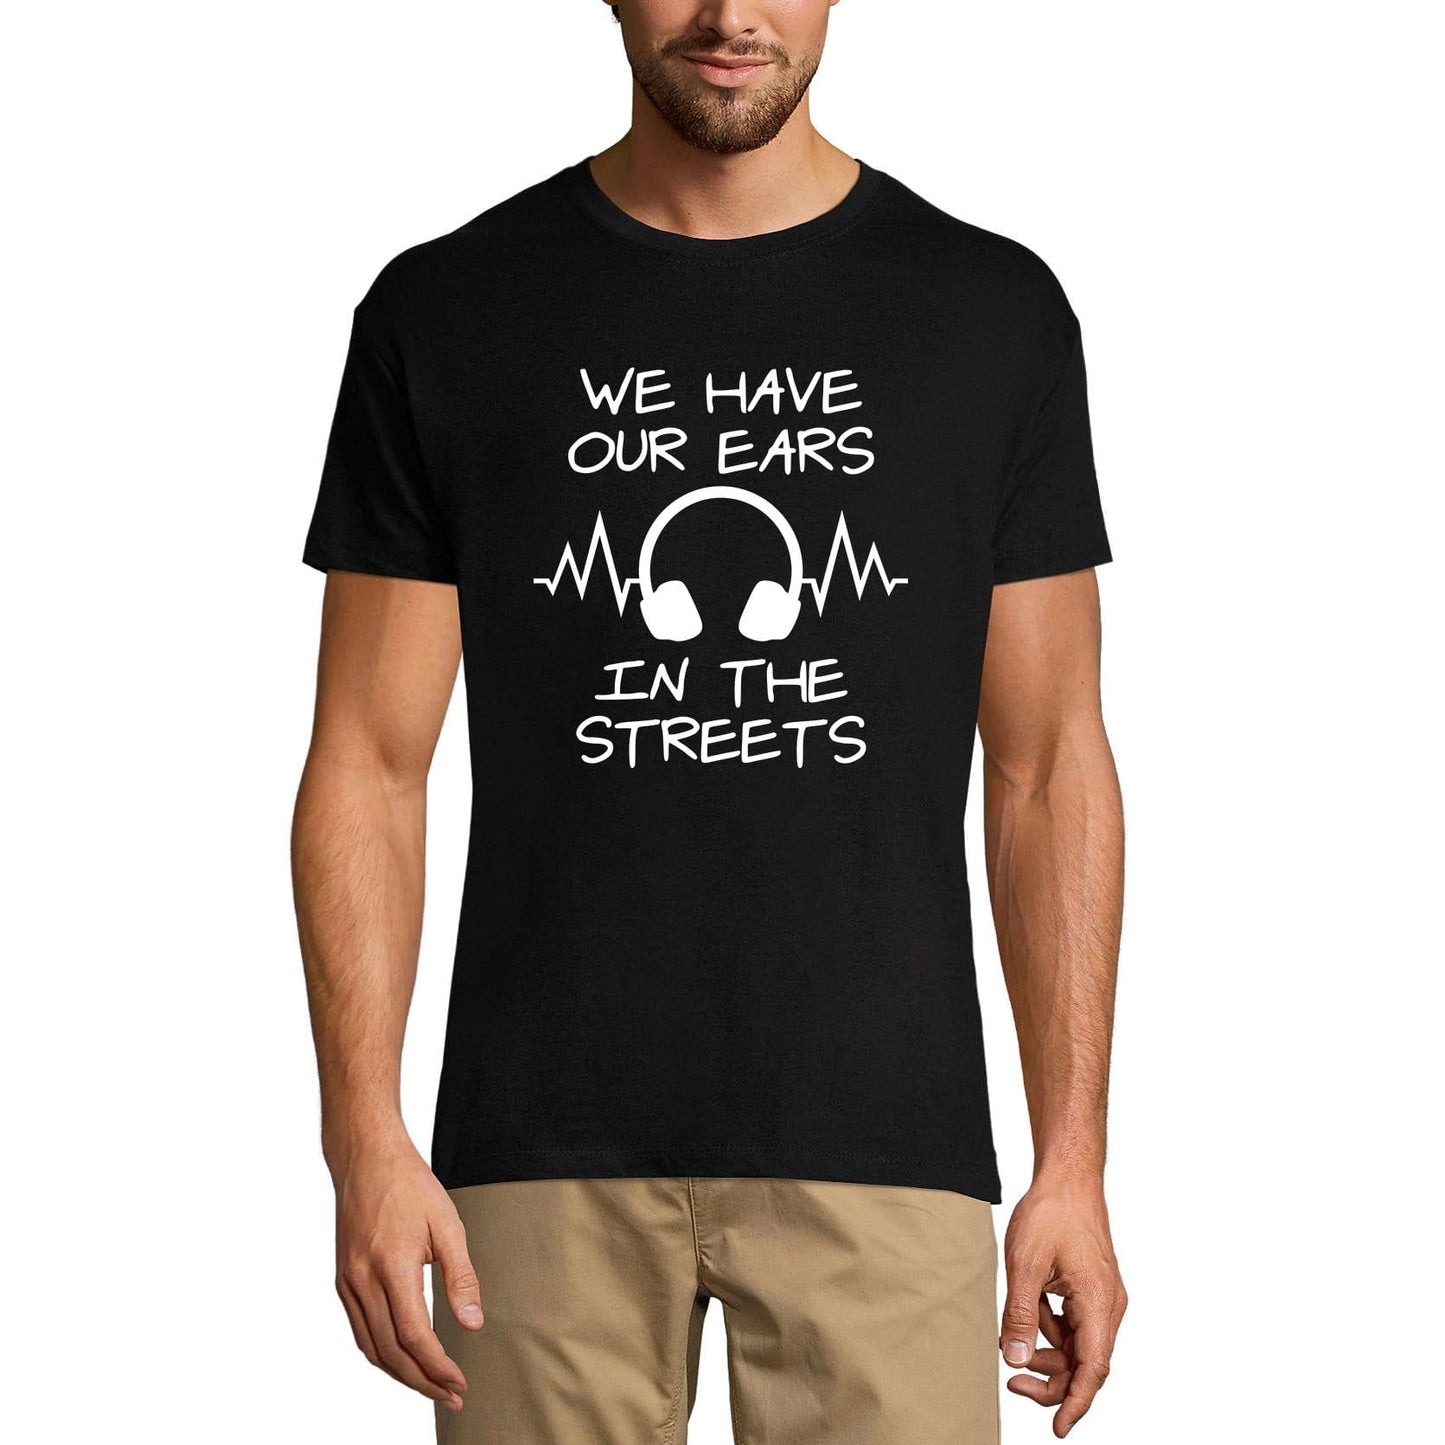 ULTRABASIC Men's Music T-Shirt We Have Our Ears in the Streets - Headphone Shirt